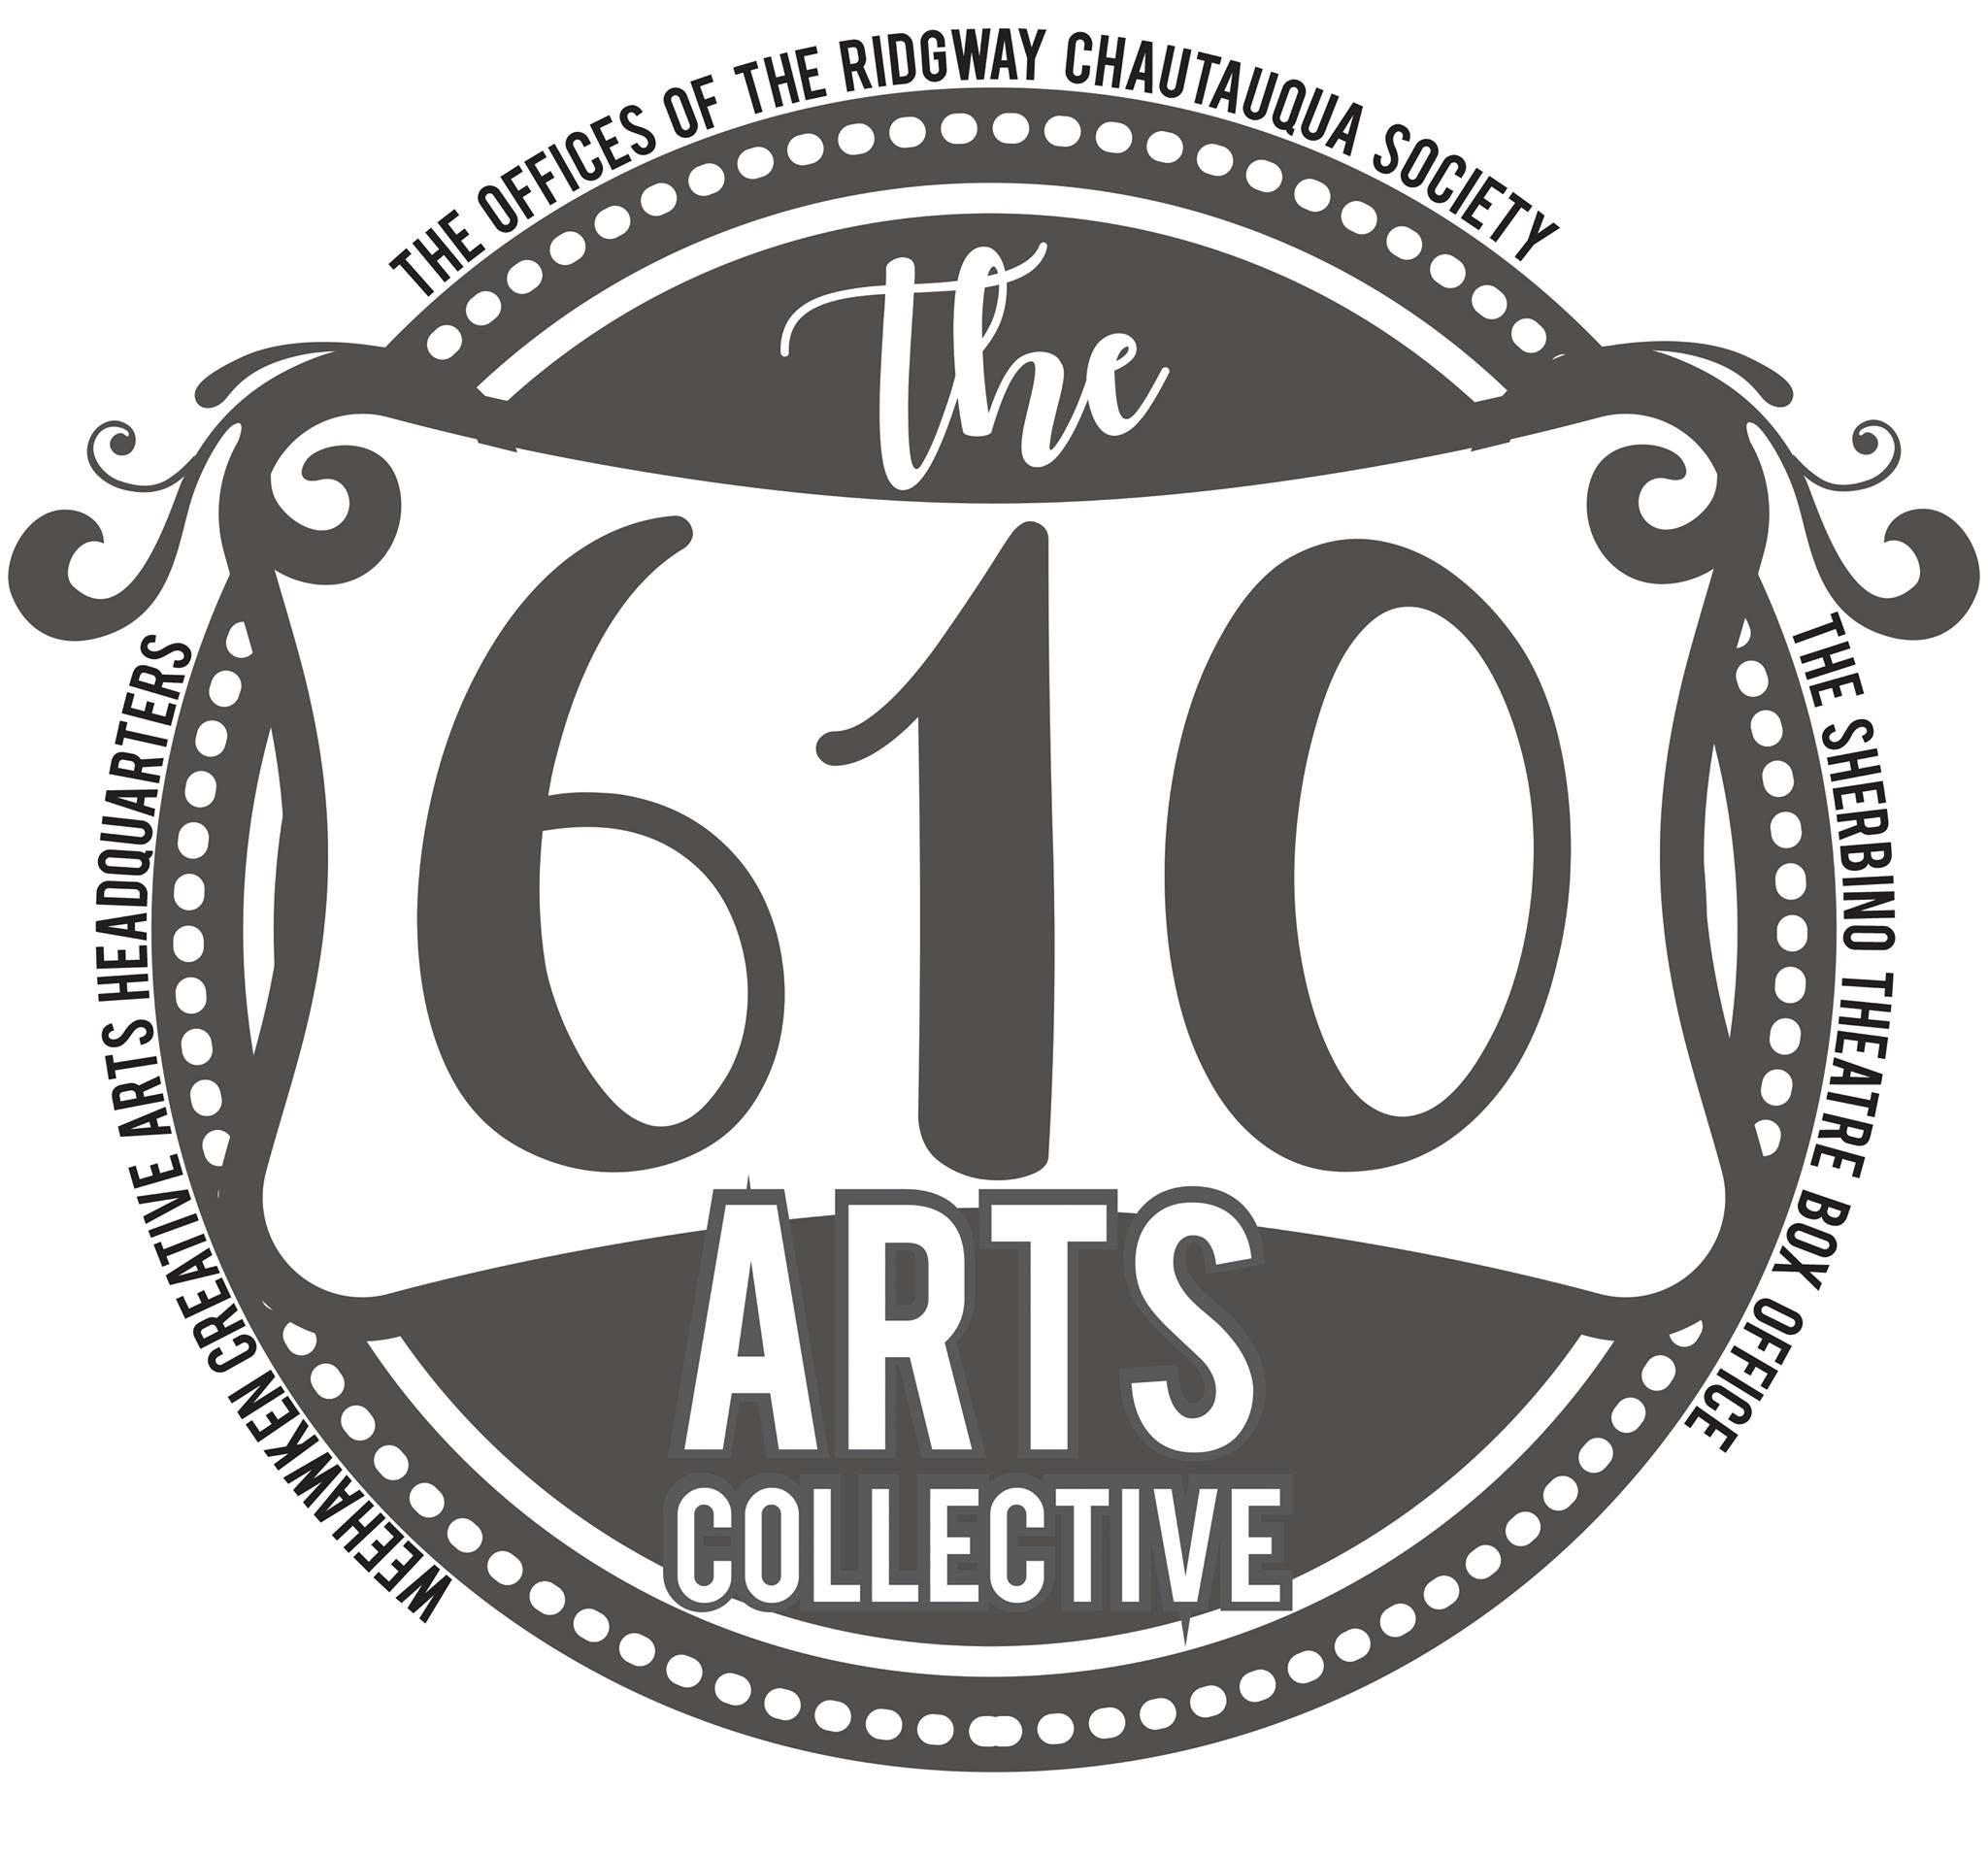 610 Arts Collective